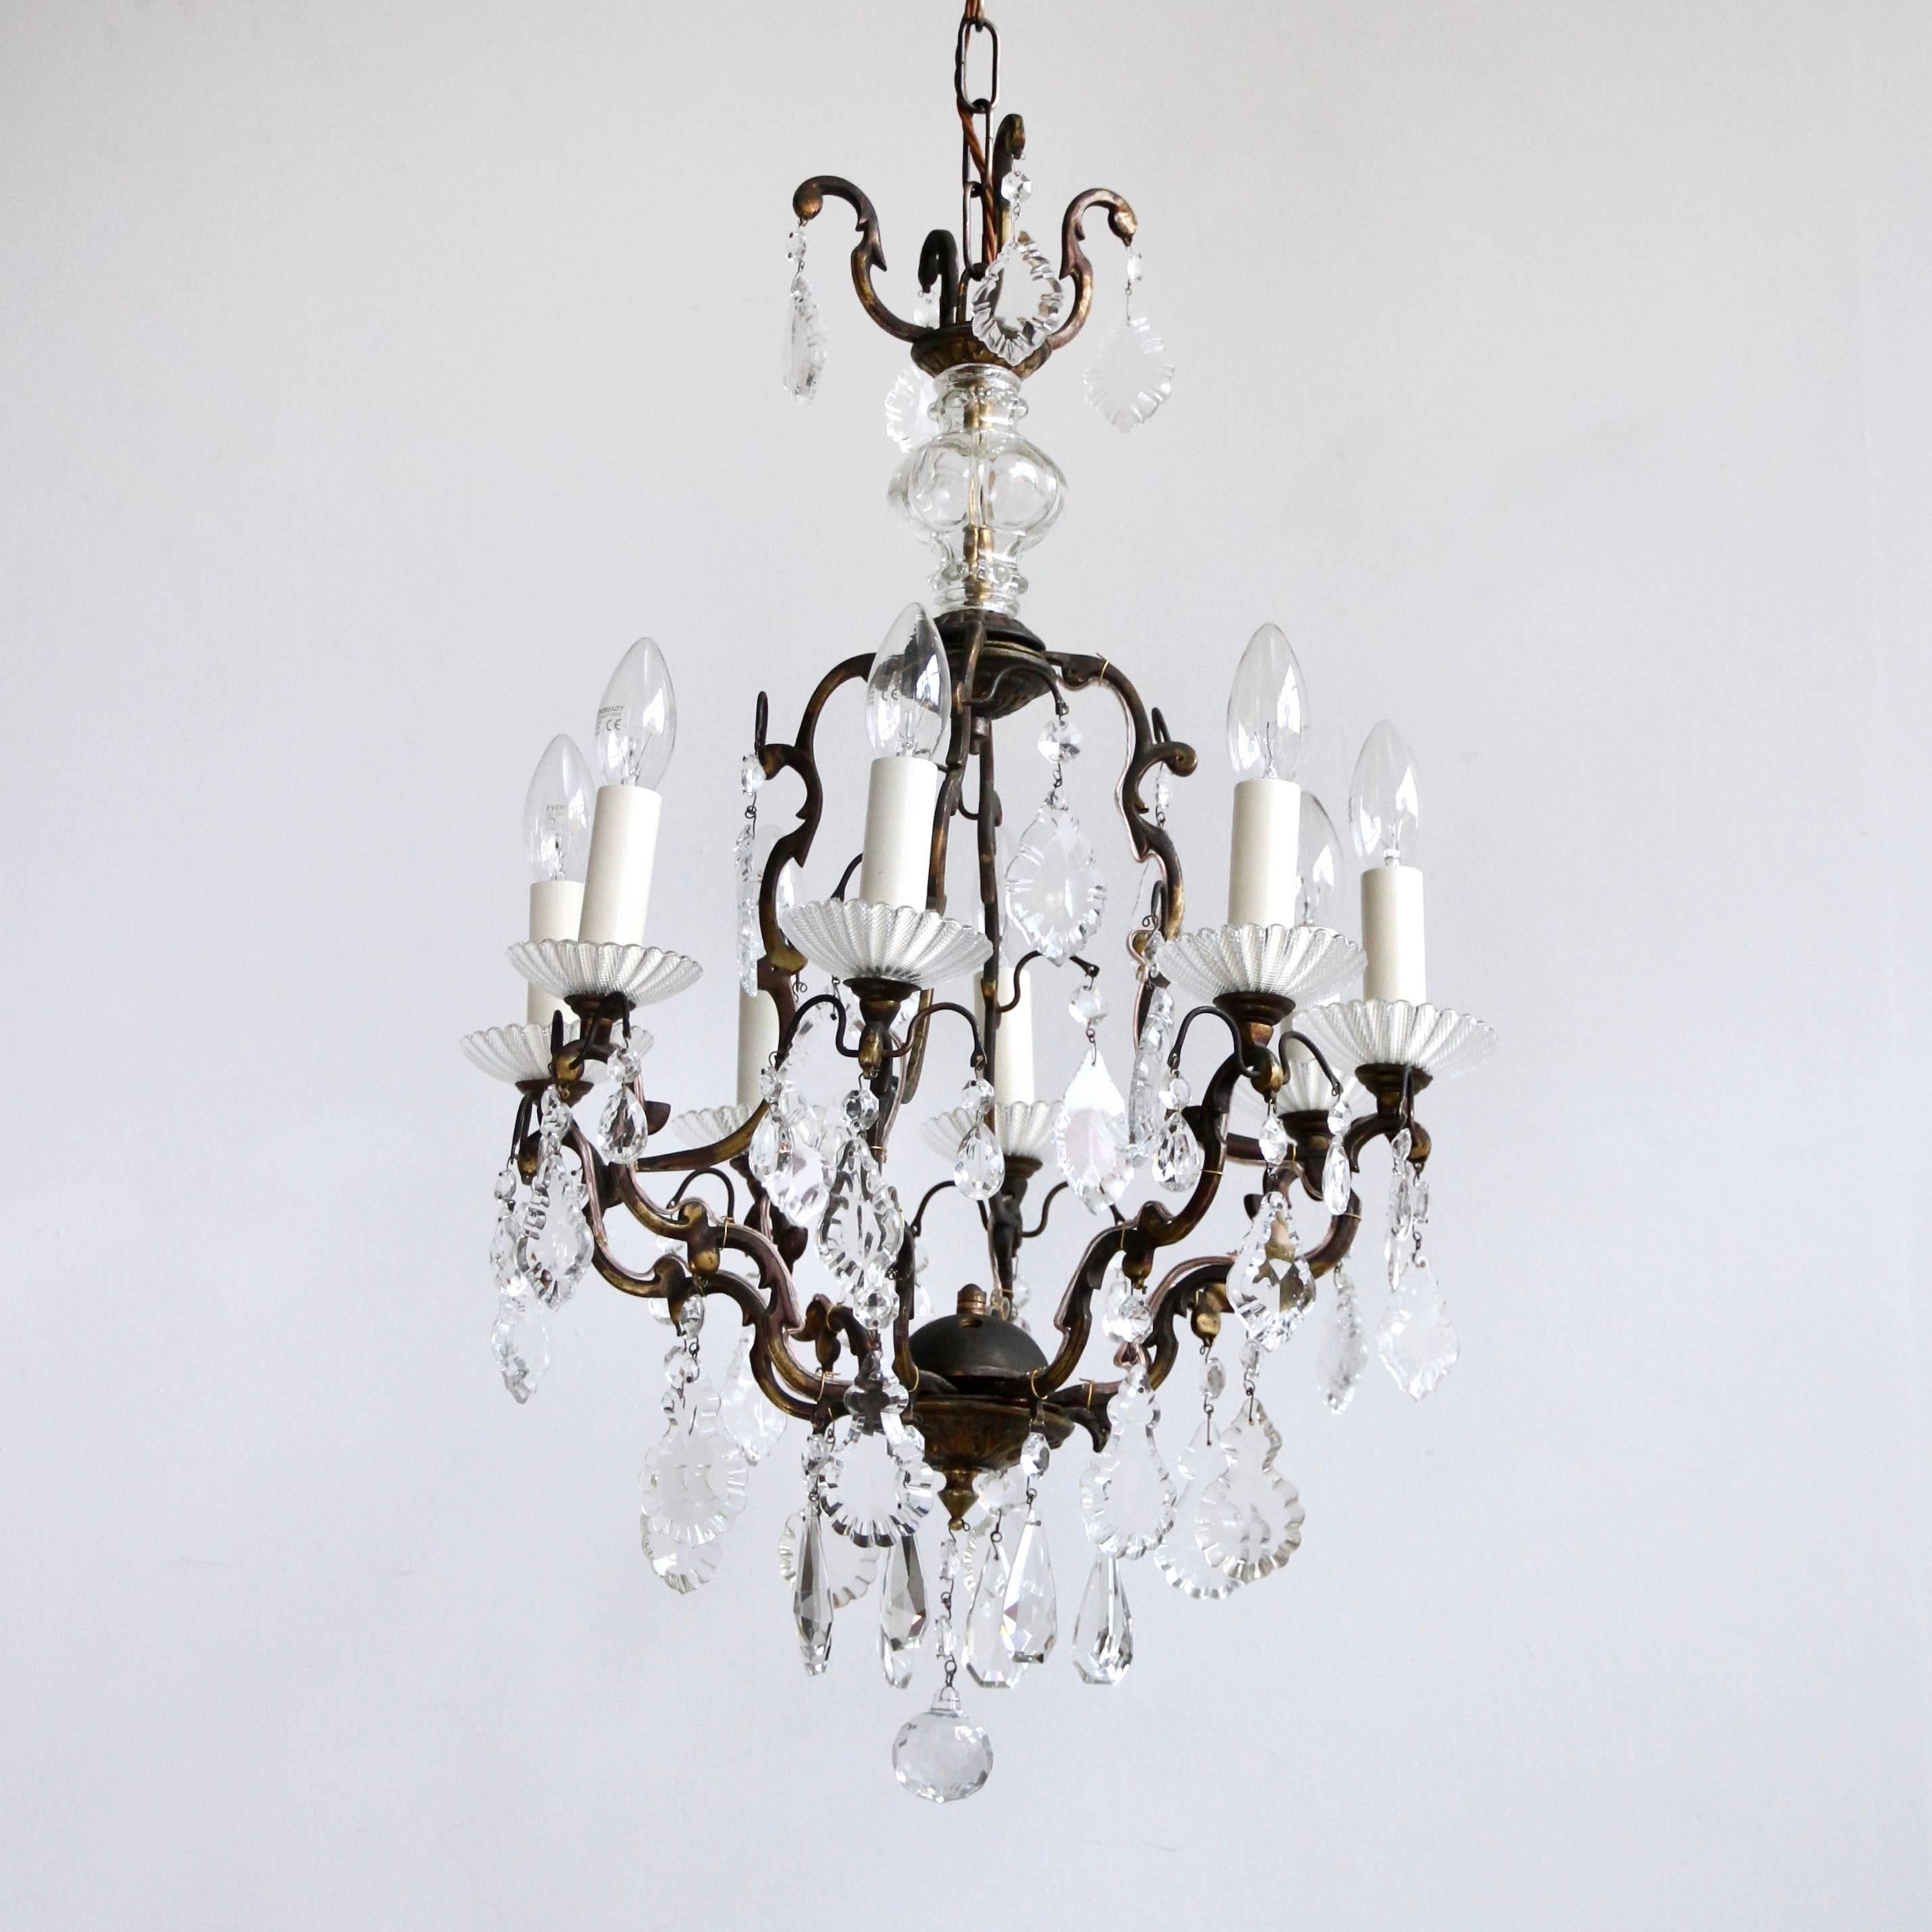 Fully rewired and restored this delicate brass birdcage chandelier originates from early 1900s Italy. Dressed in a mix of hand cut crystal and glass flat leaf drops it is an elegant centre piece. The brass chandelier frame has been partially